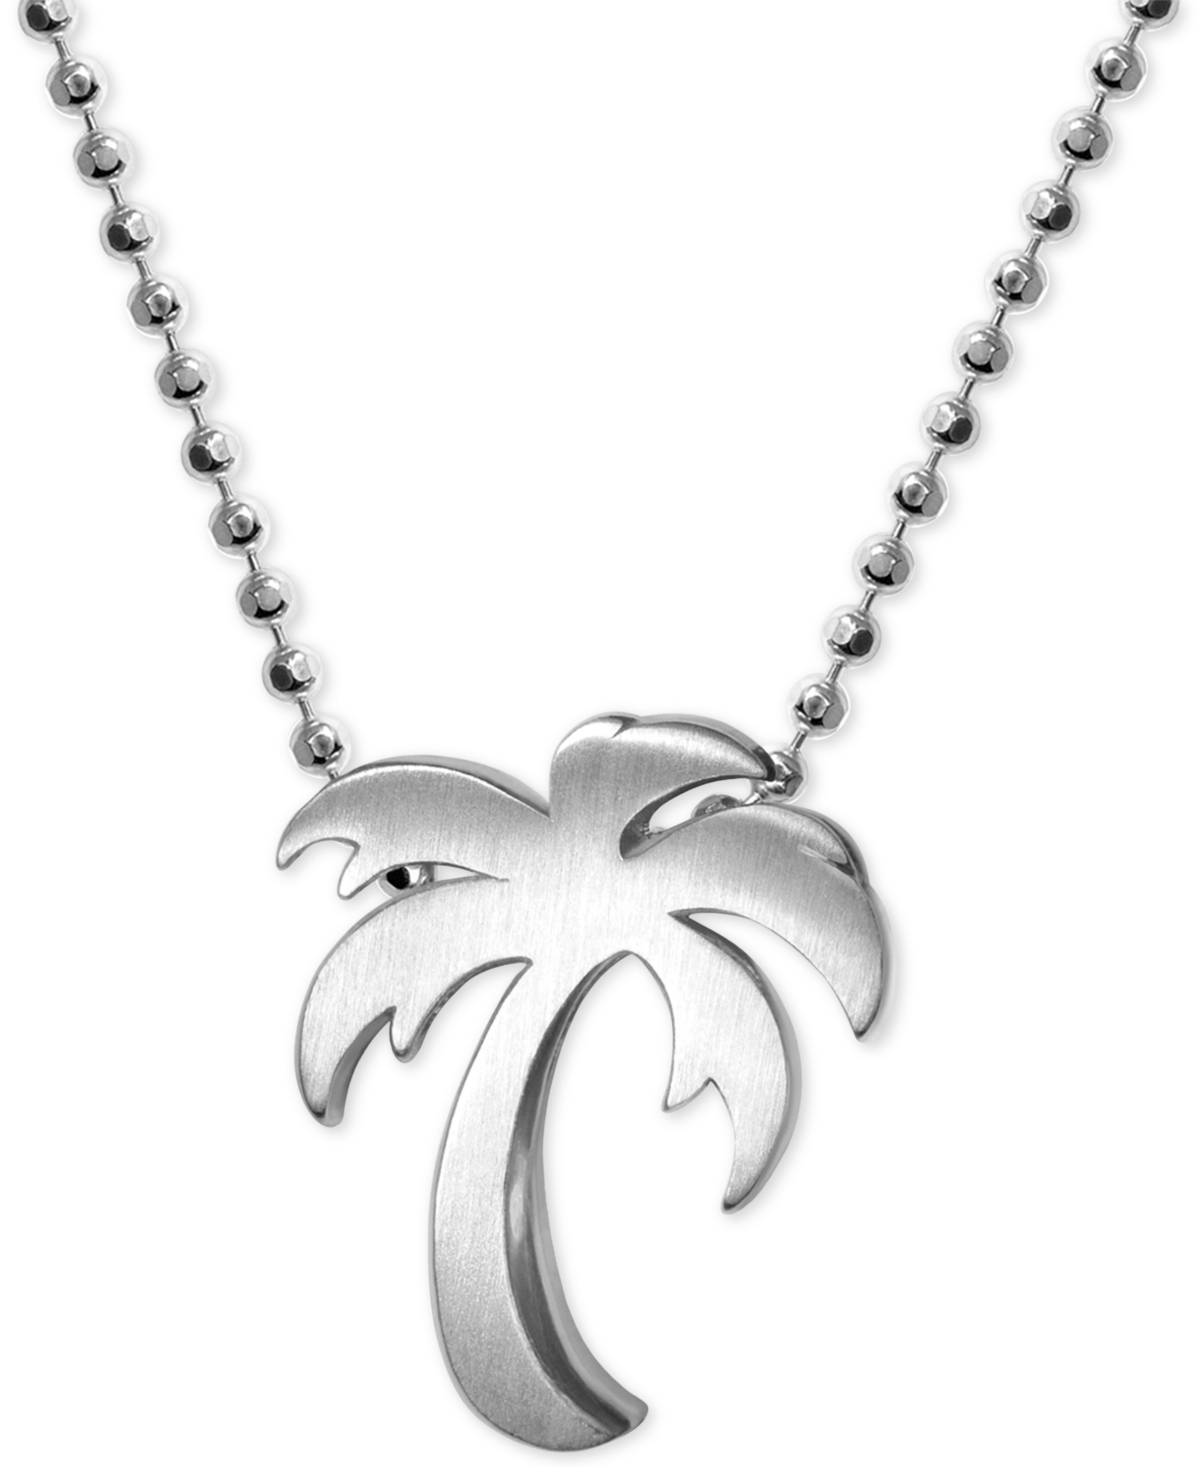 Alex Woo Palm Tree 16" Pendant Necklace in Sterling Silver